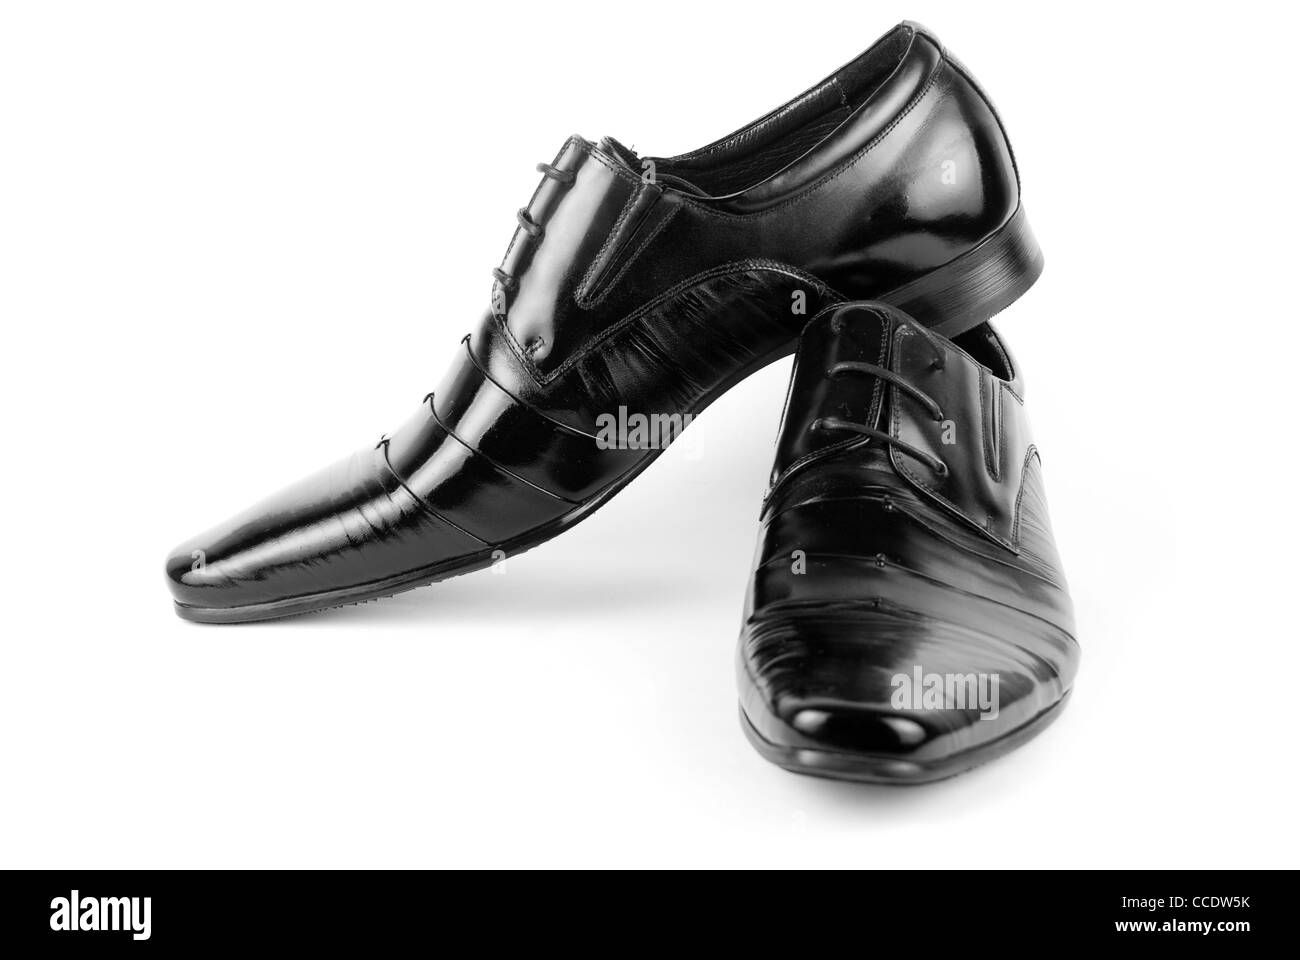 British men's shoes and object Black and White Stock Photos & Images ...